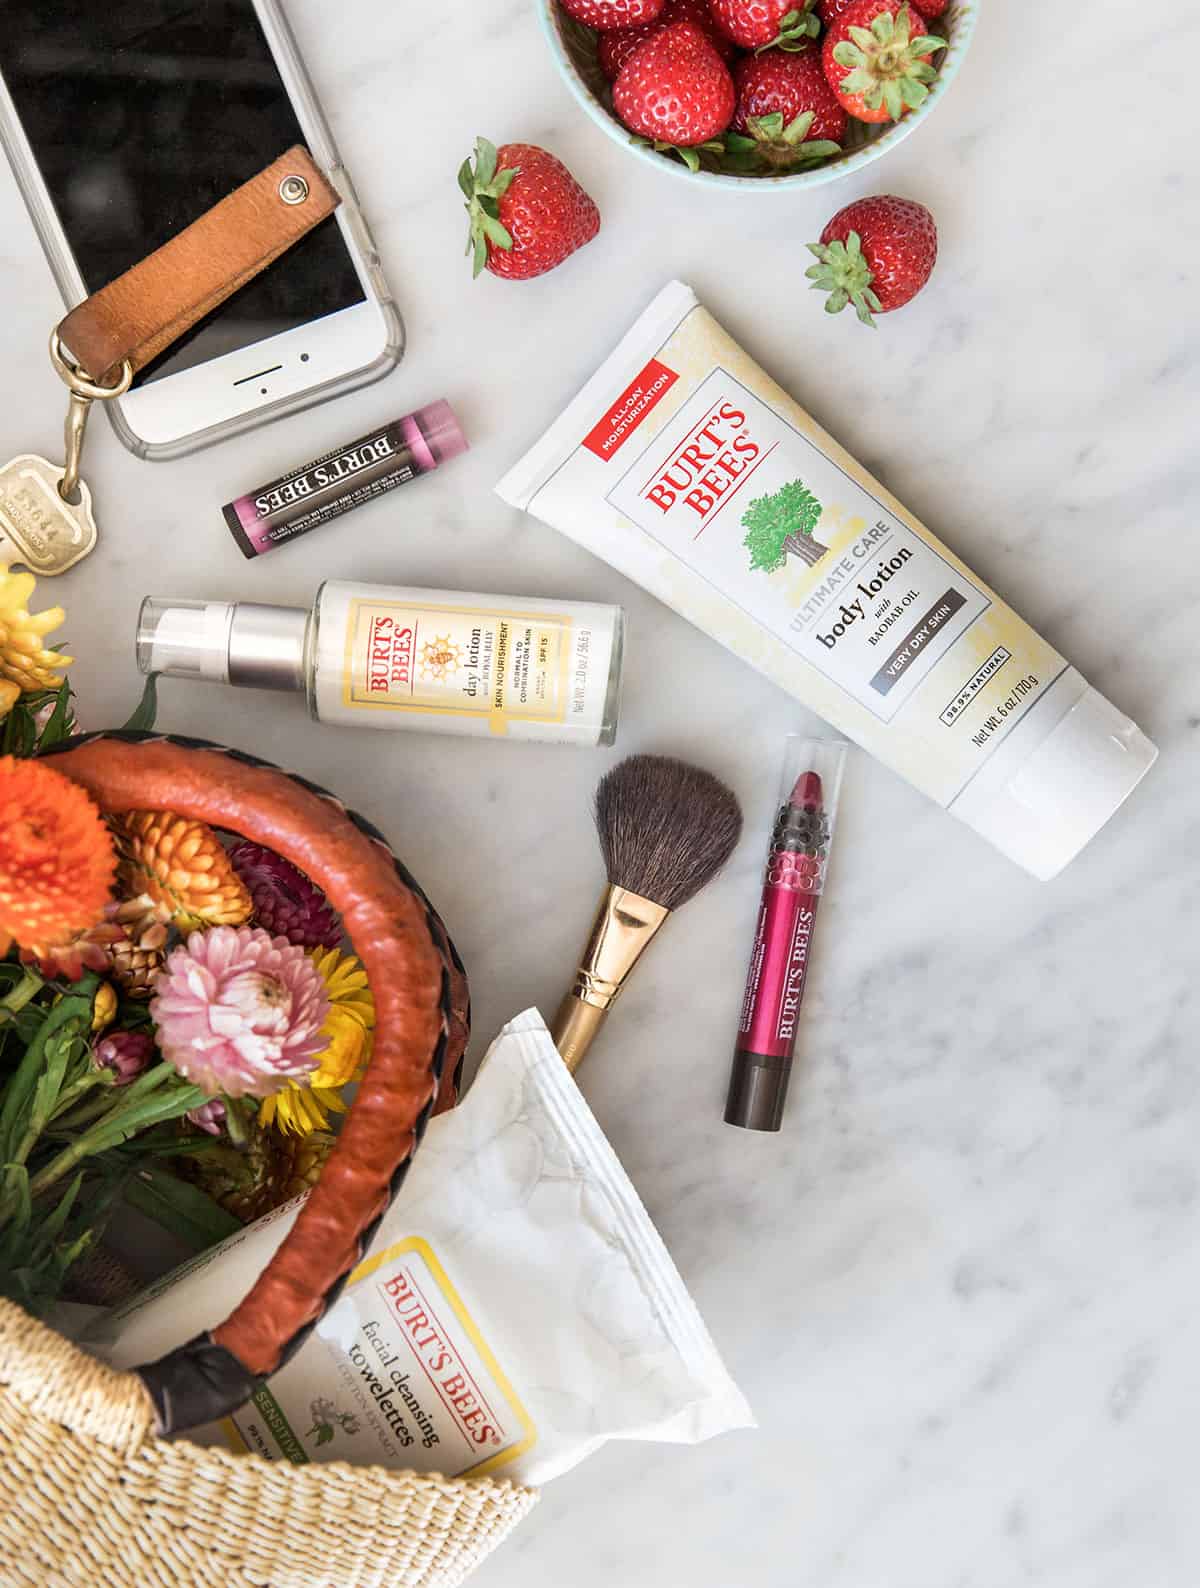 My Summer Skincare Routine with Burt’s Bees + Grove Collaborative